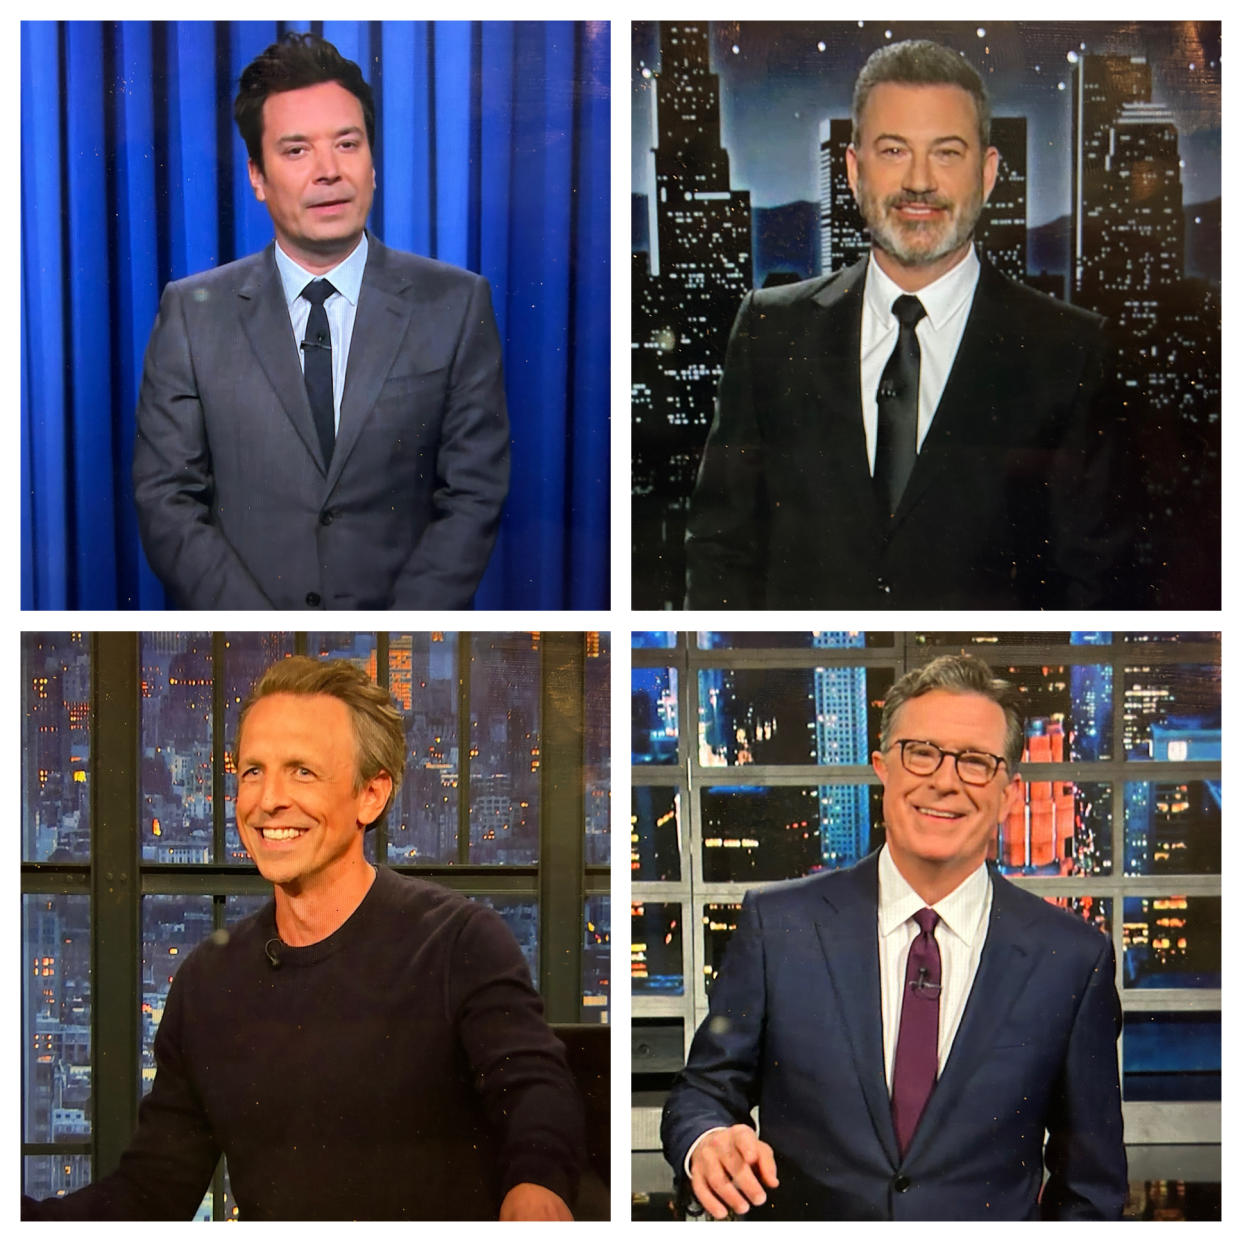 With the writers' strike in the rearview mirror, late-night talk show hosts Jimmy Fallon, Jimmy Kimmel, Stephen Colbert and Seth Meyers came back in force.